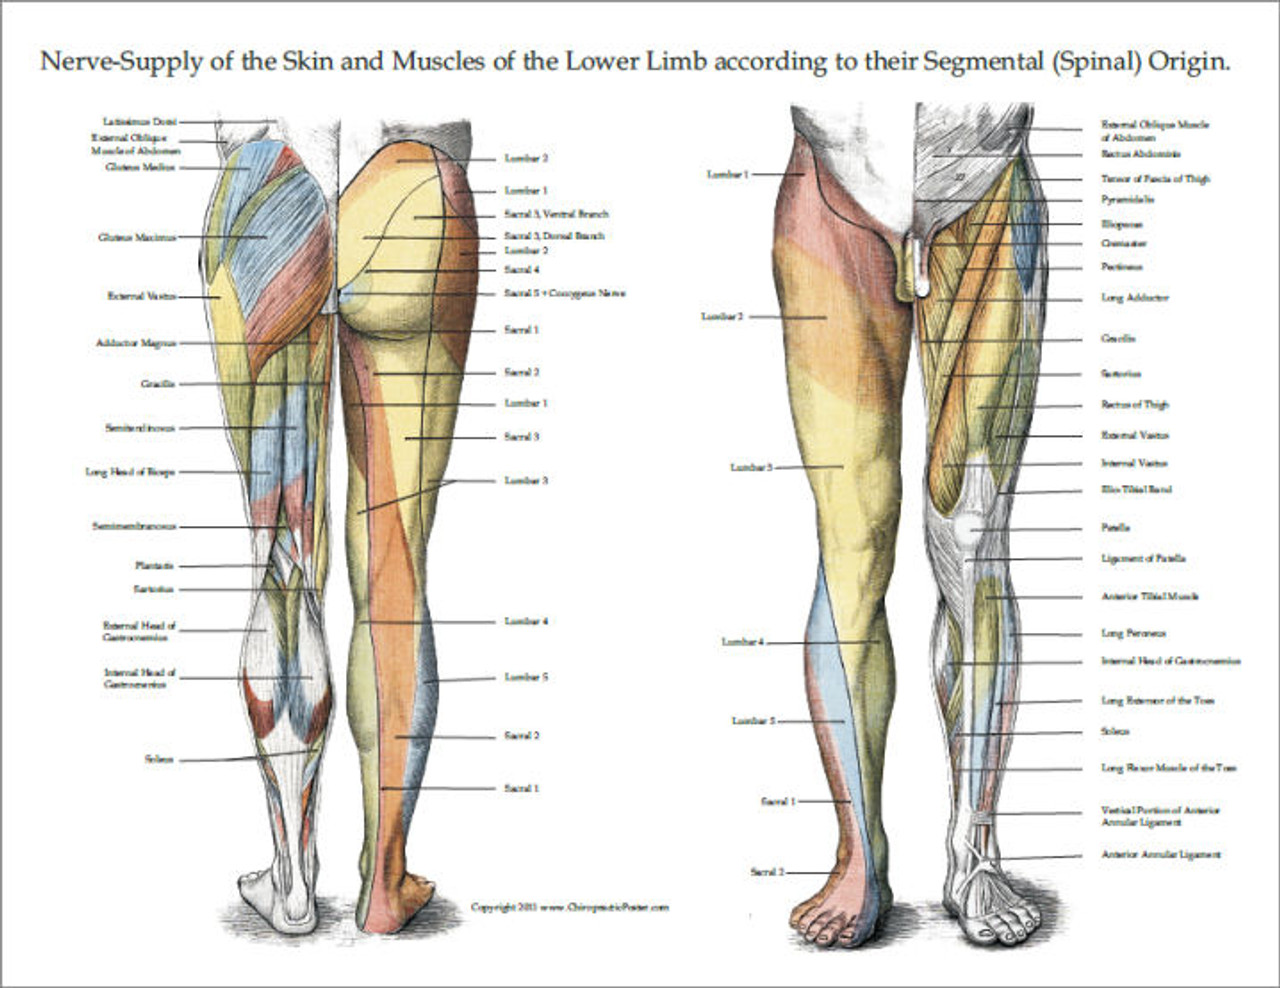 Upper Extremity Innervation Chart